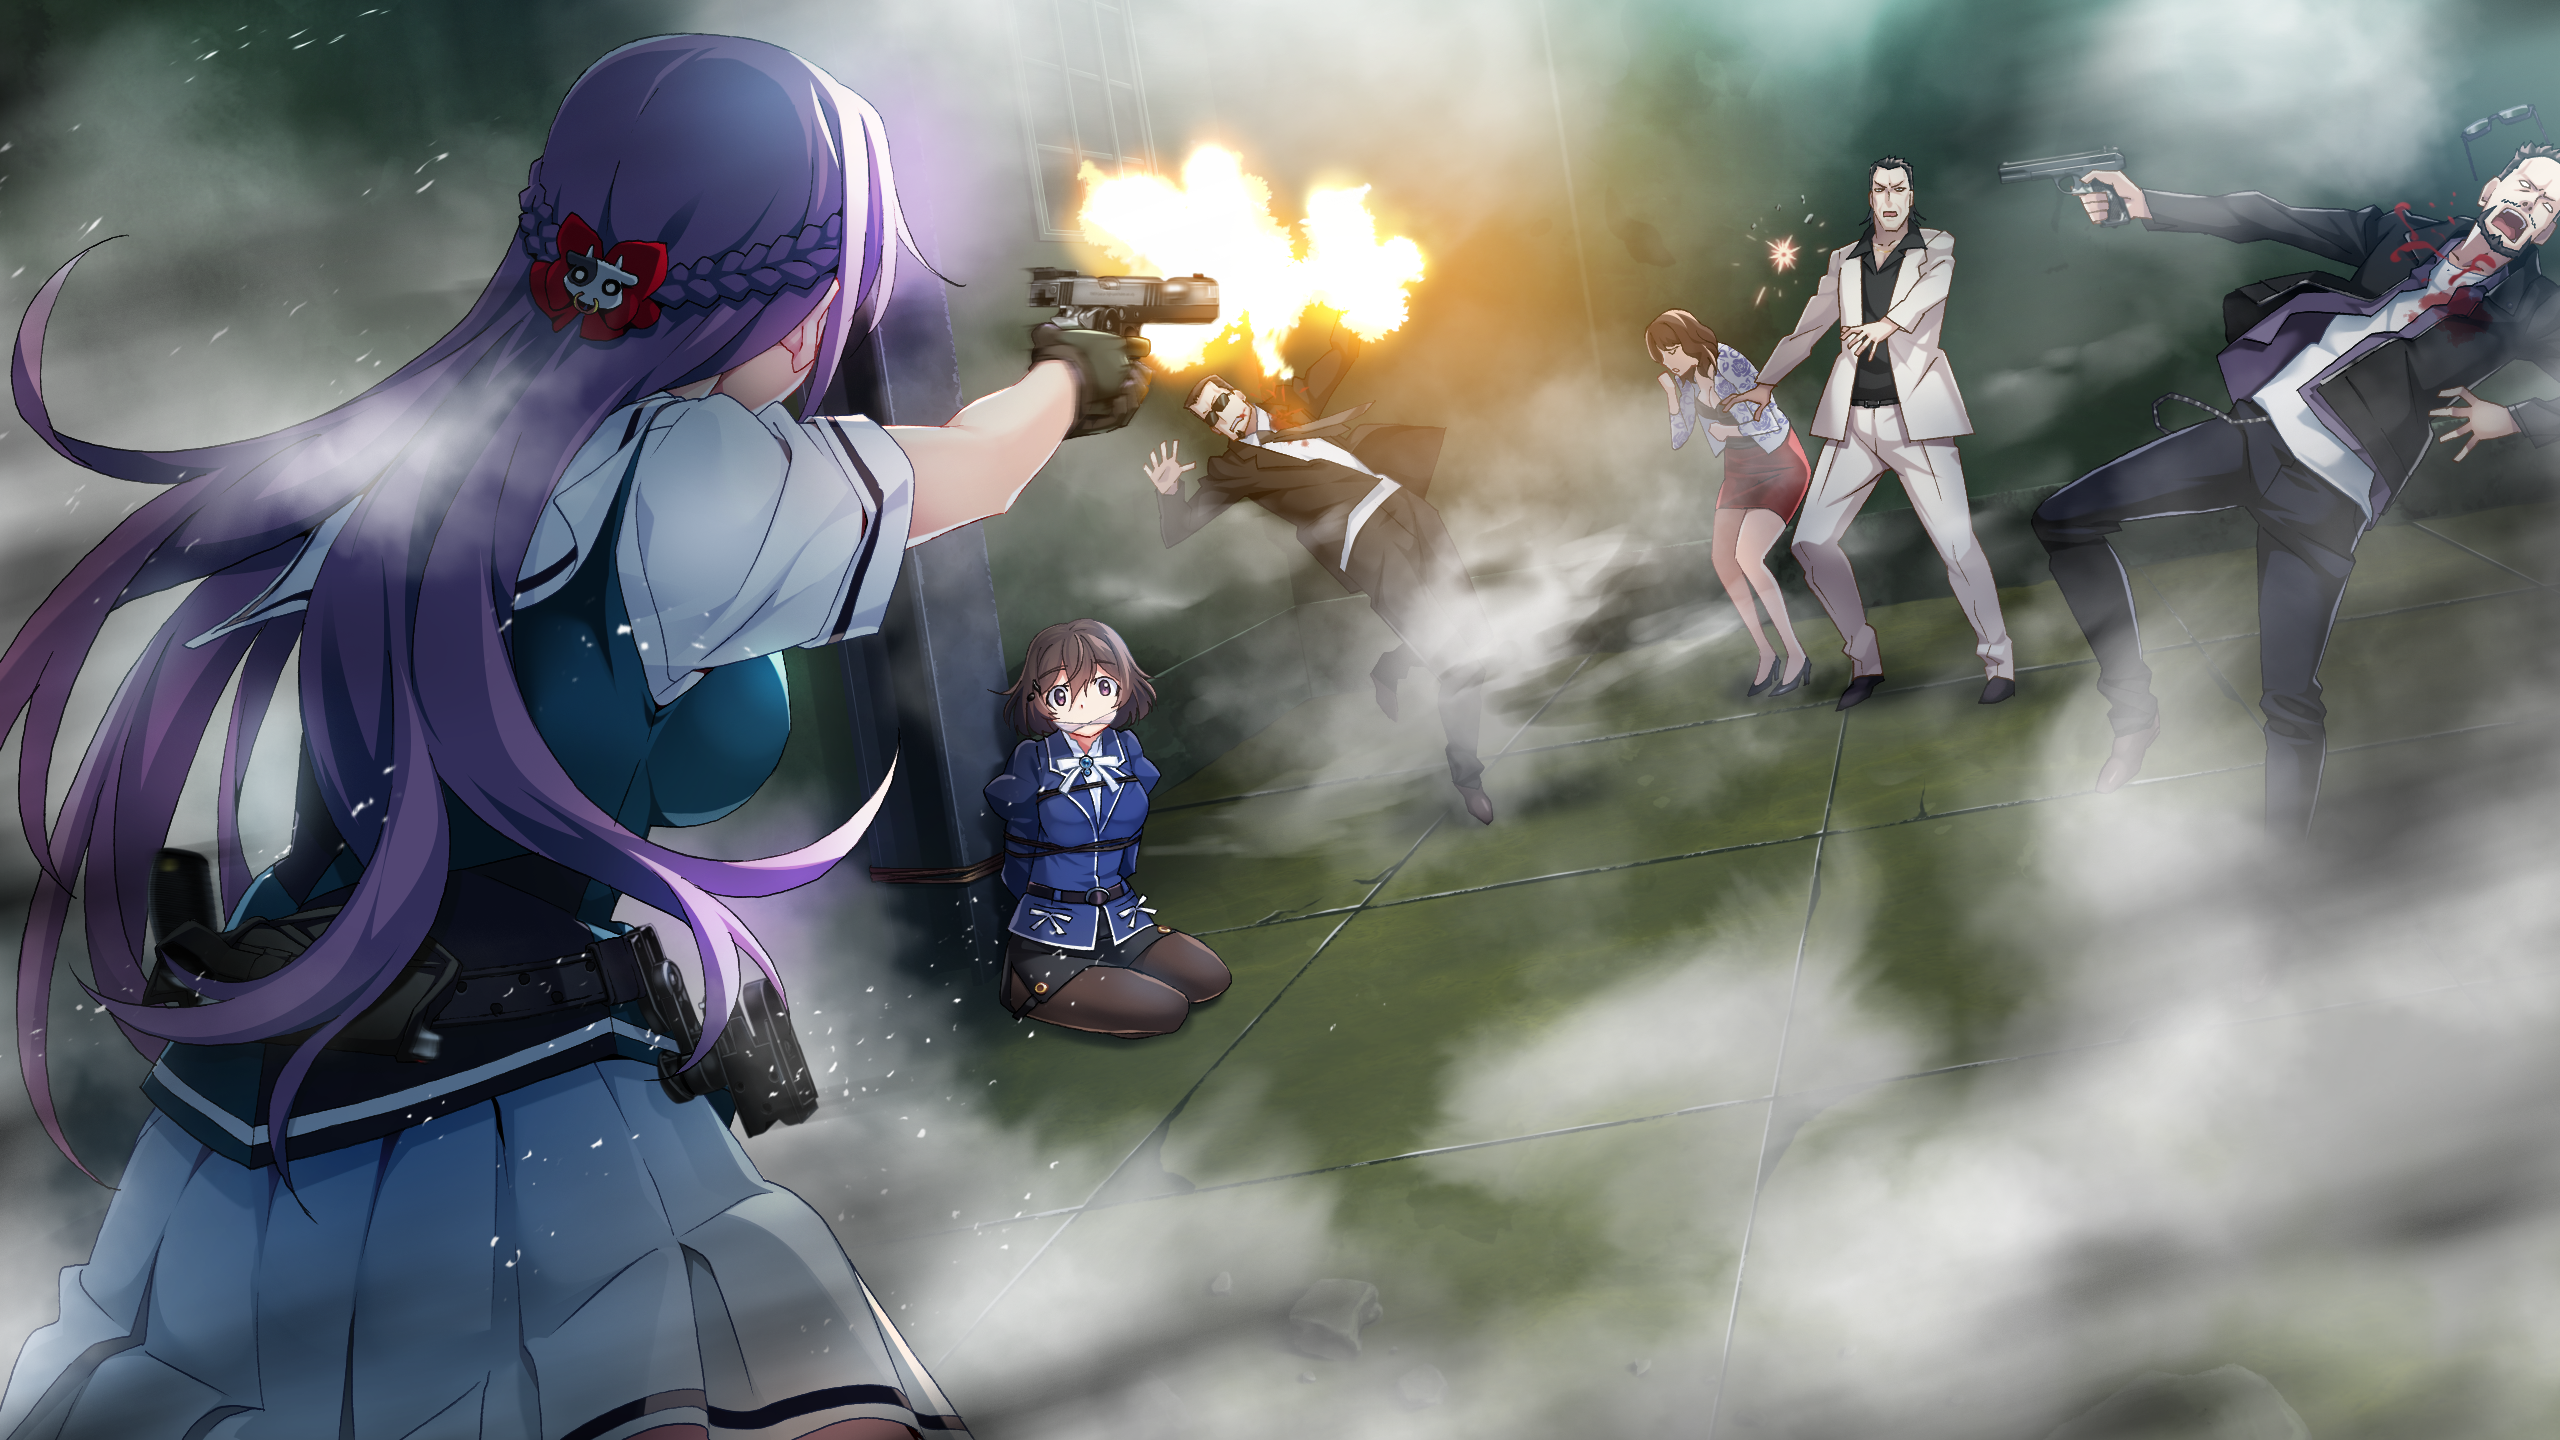 Grisaia Wallpapers